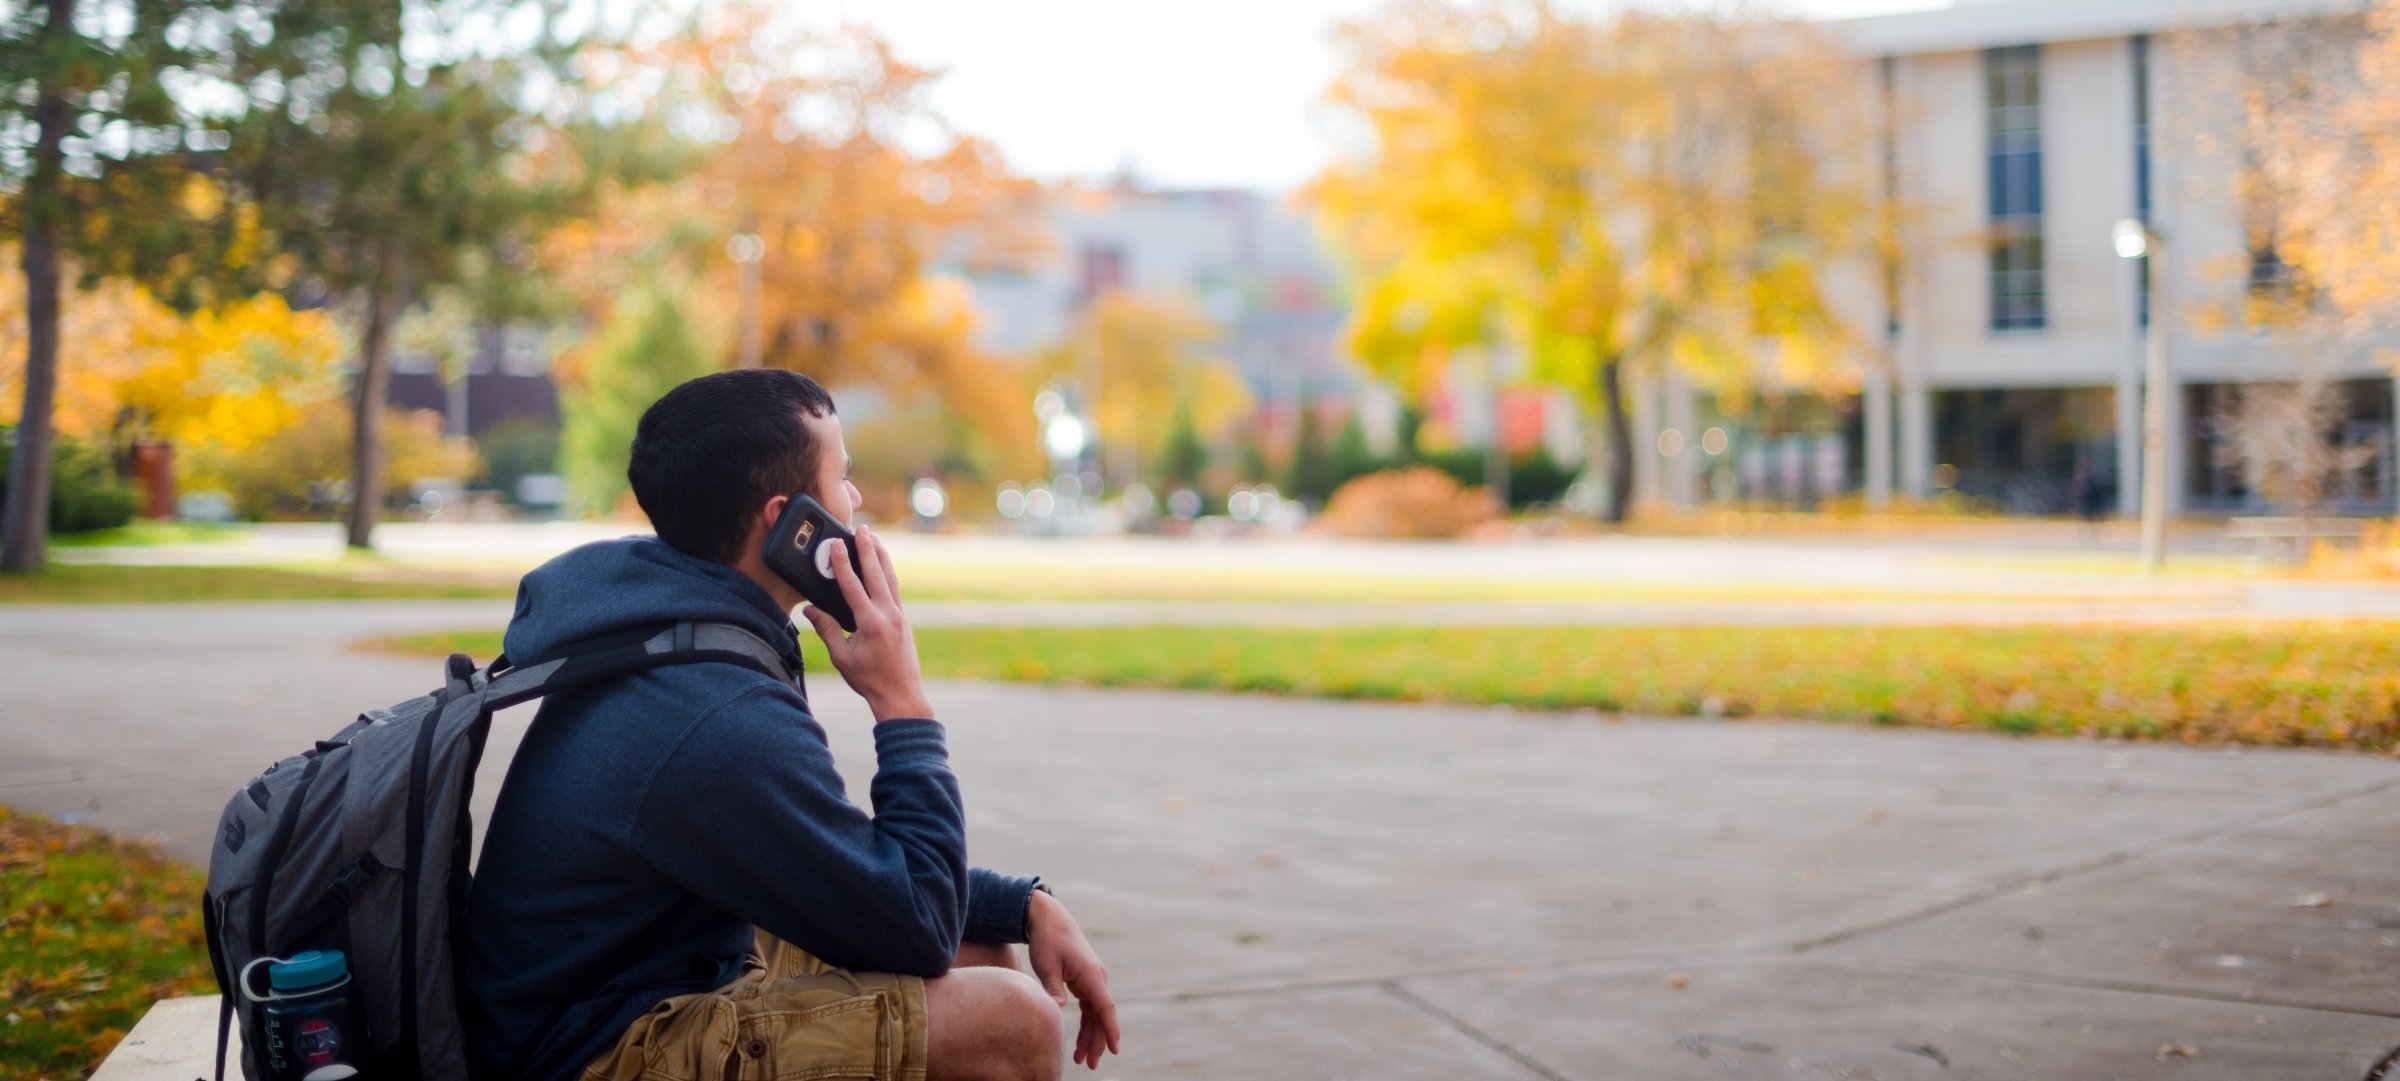 Student on campus, talking on phone